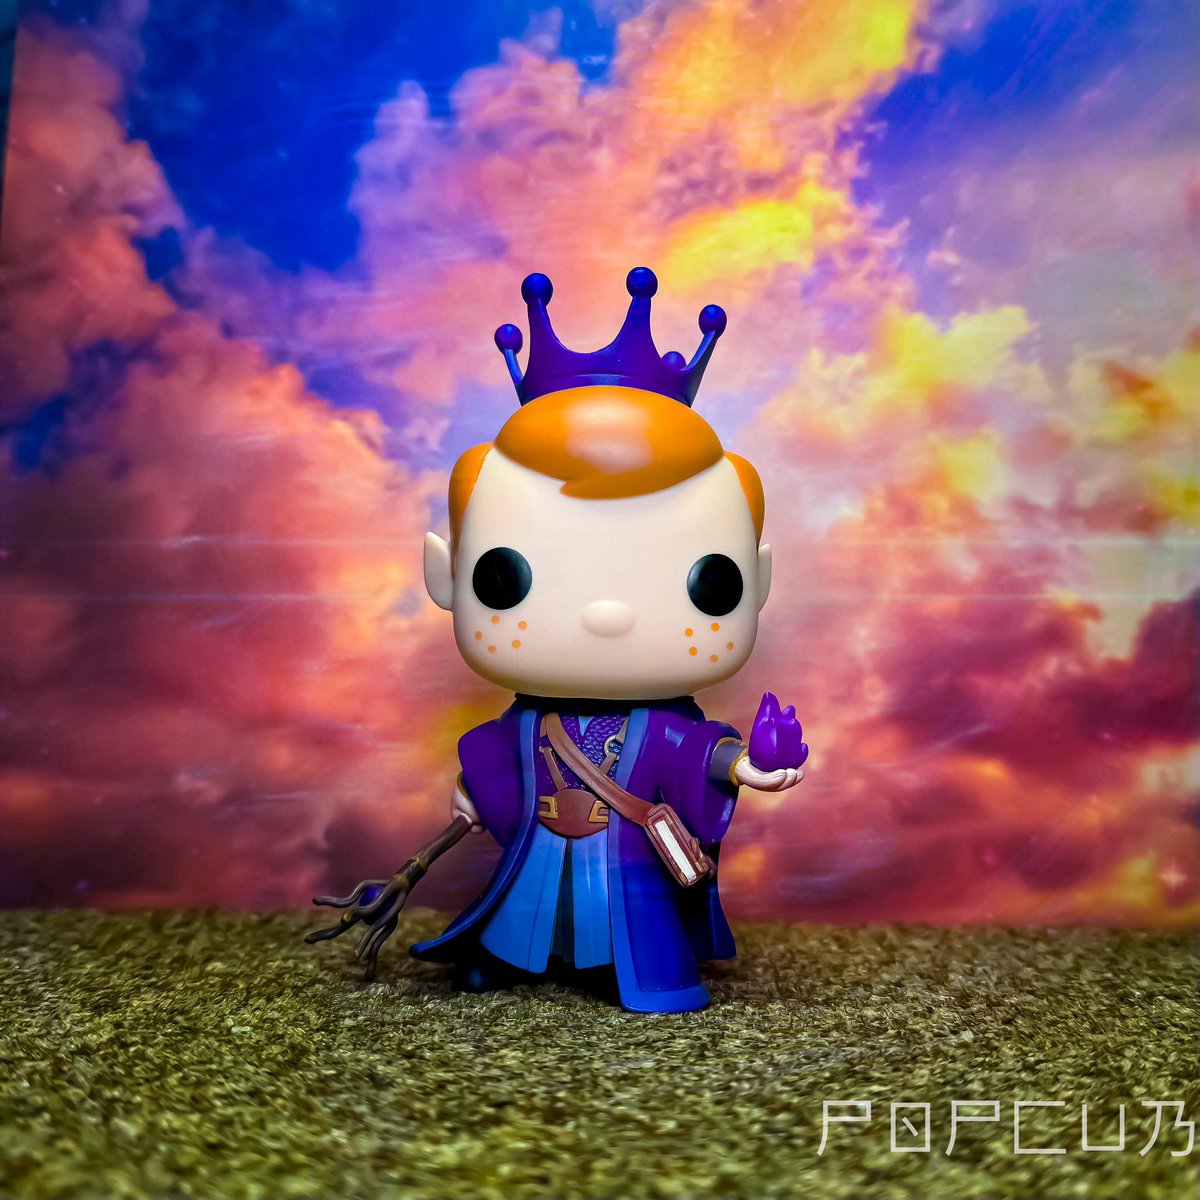 Freddy Funko as High Elf LE 2500

Took a break from the photo a day challenge to show off my awesome #mailcall from @Dropppio and @OriginalFunko 

👑 @OriginalFunko
📓 #MyFunkoStory 
📸 #FunkoPhotoADayChallenge
#FOTW #FunaticoftheWeek